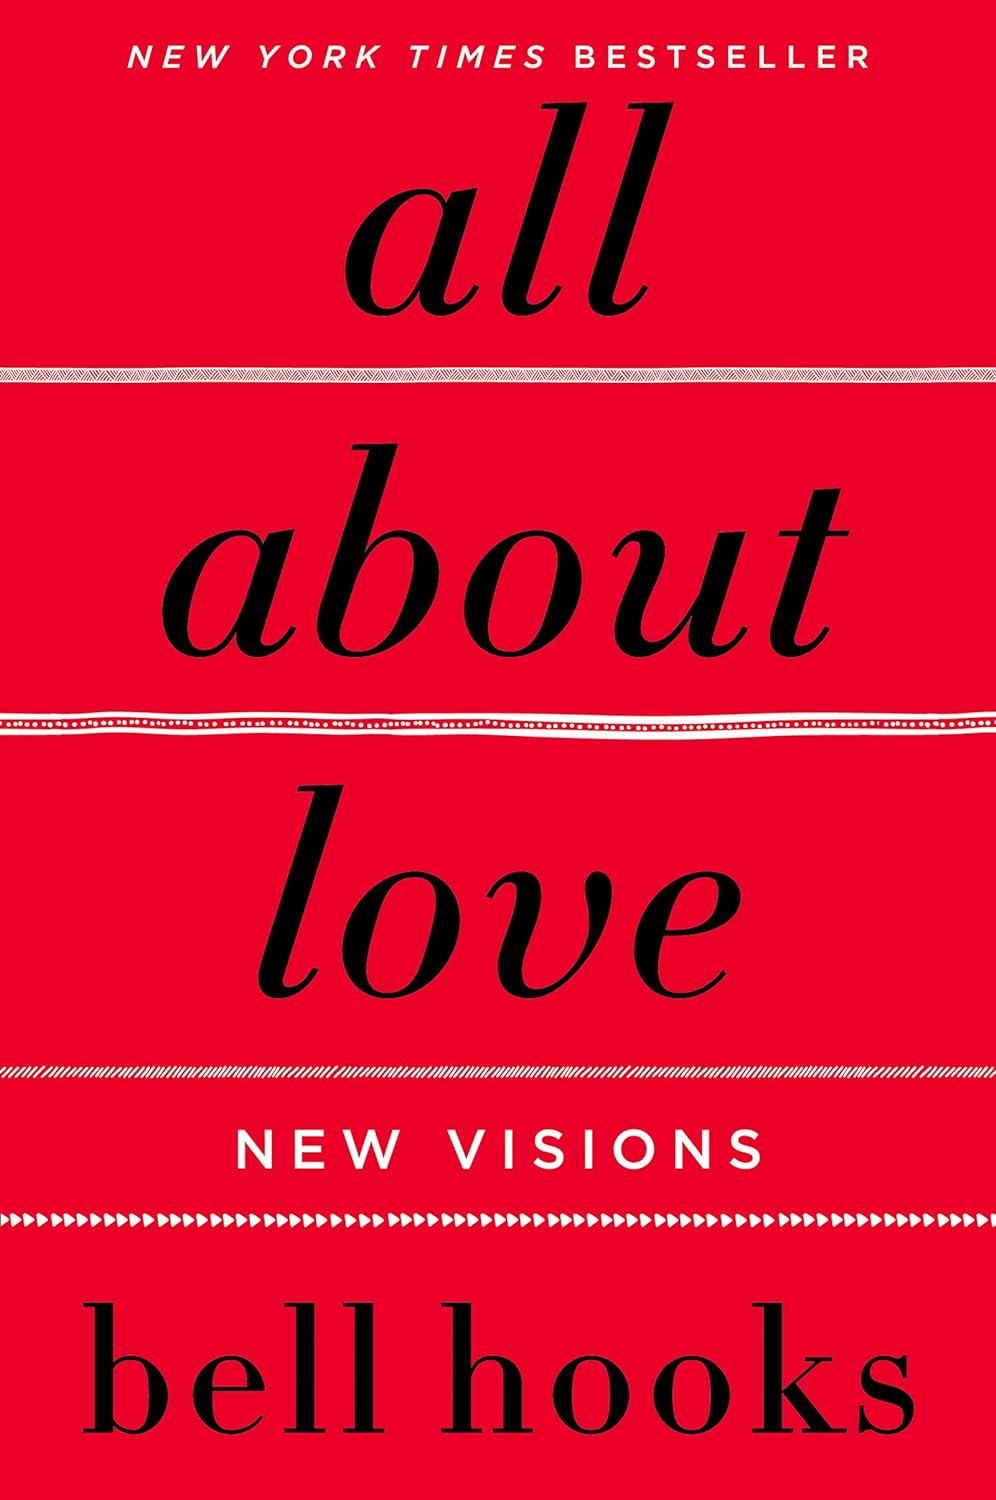 The book cover for All About Love is bright red with the title and author's name in black text, creating a striking contrast.